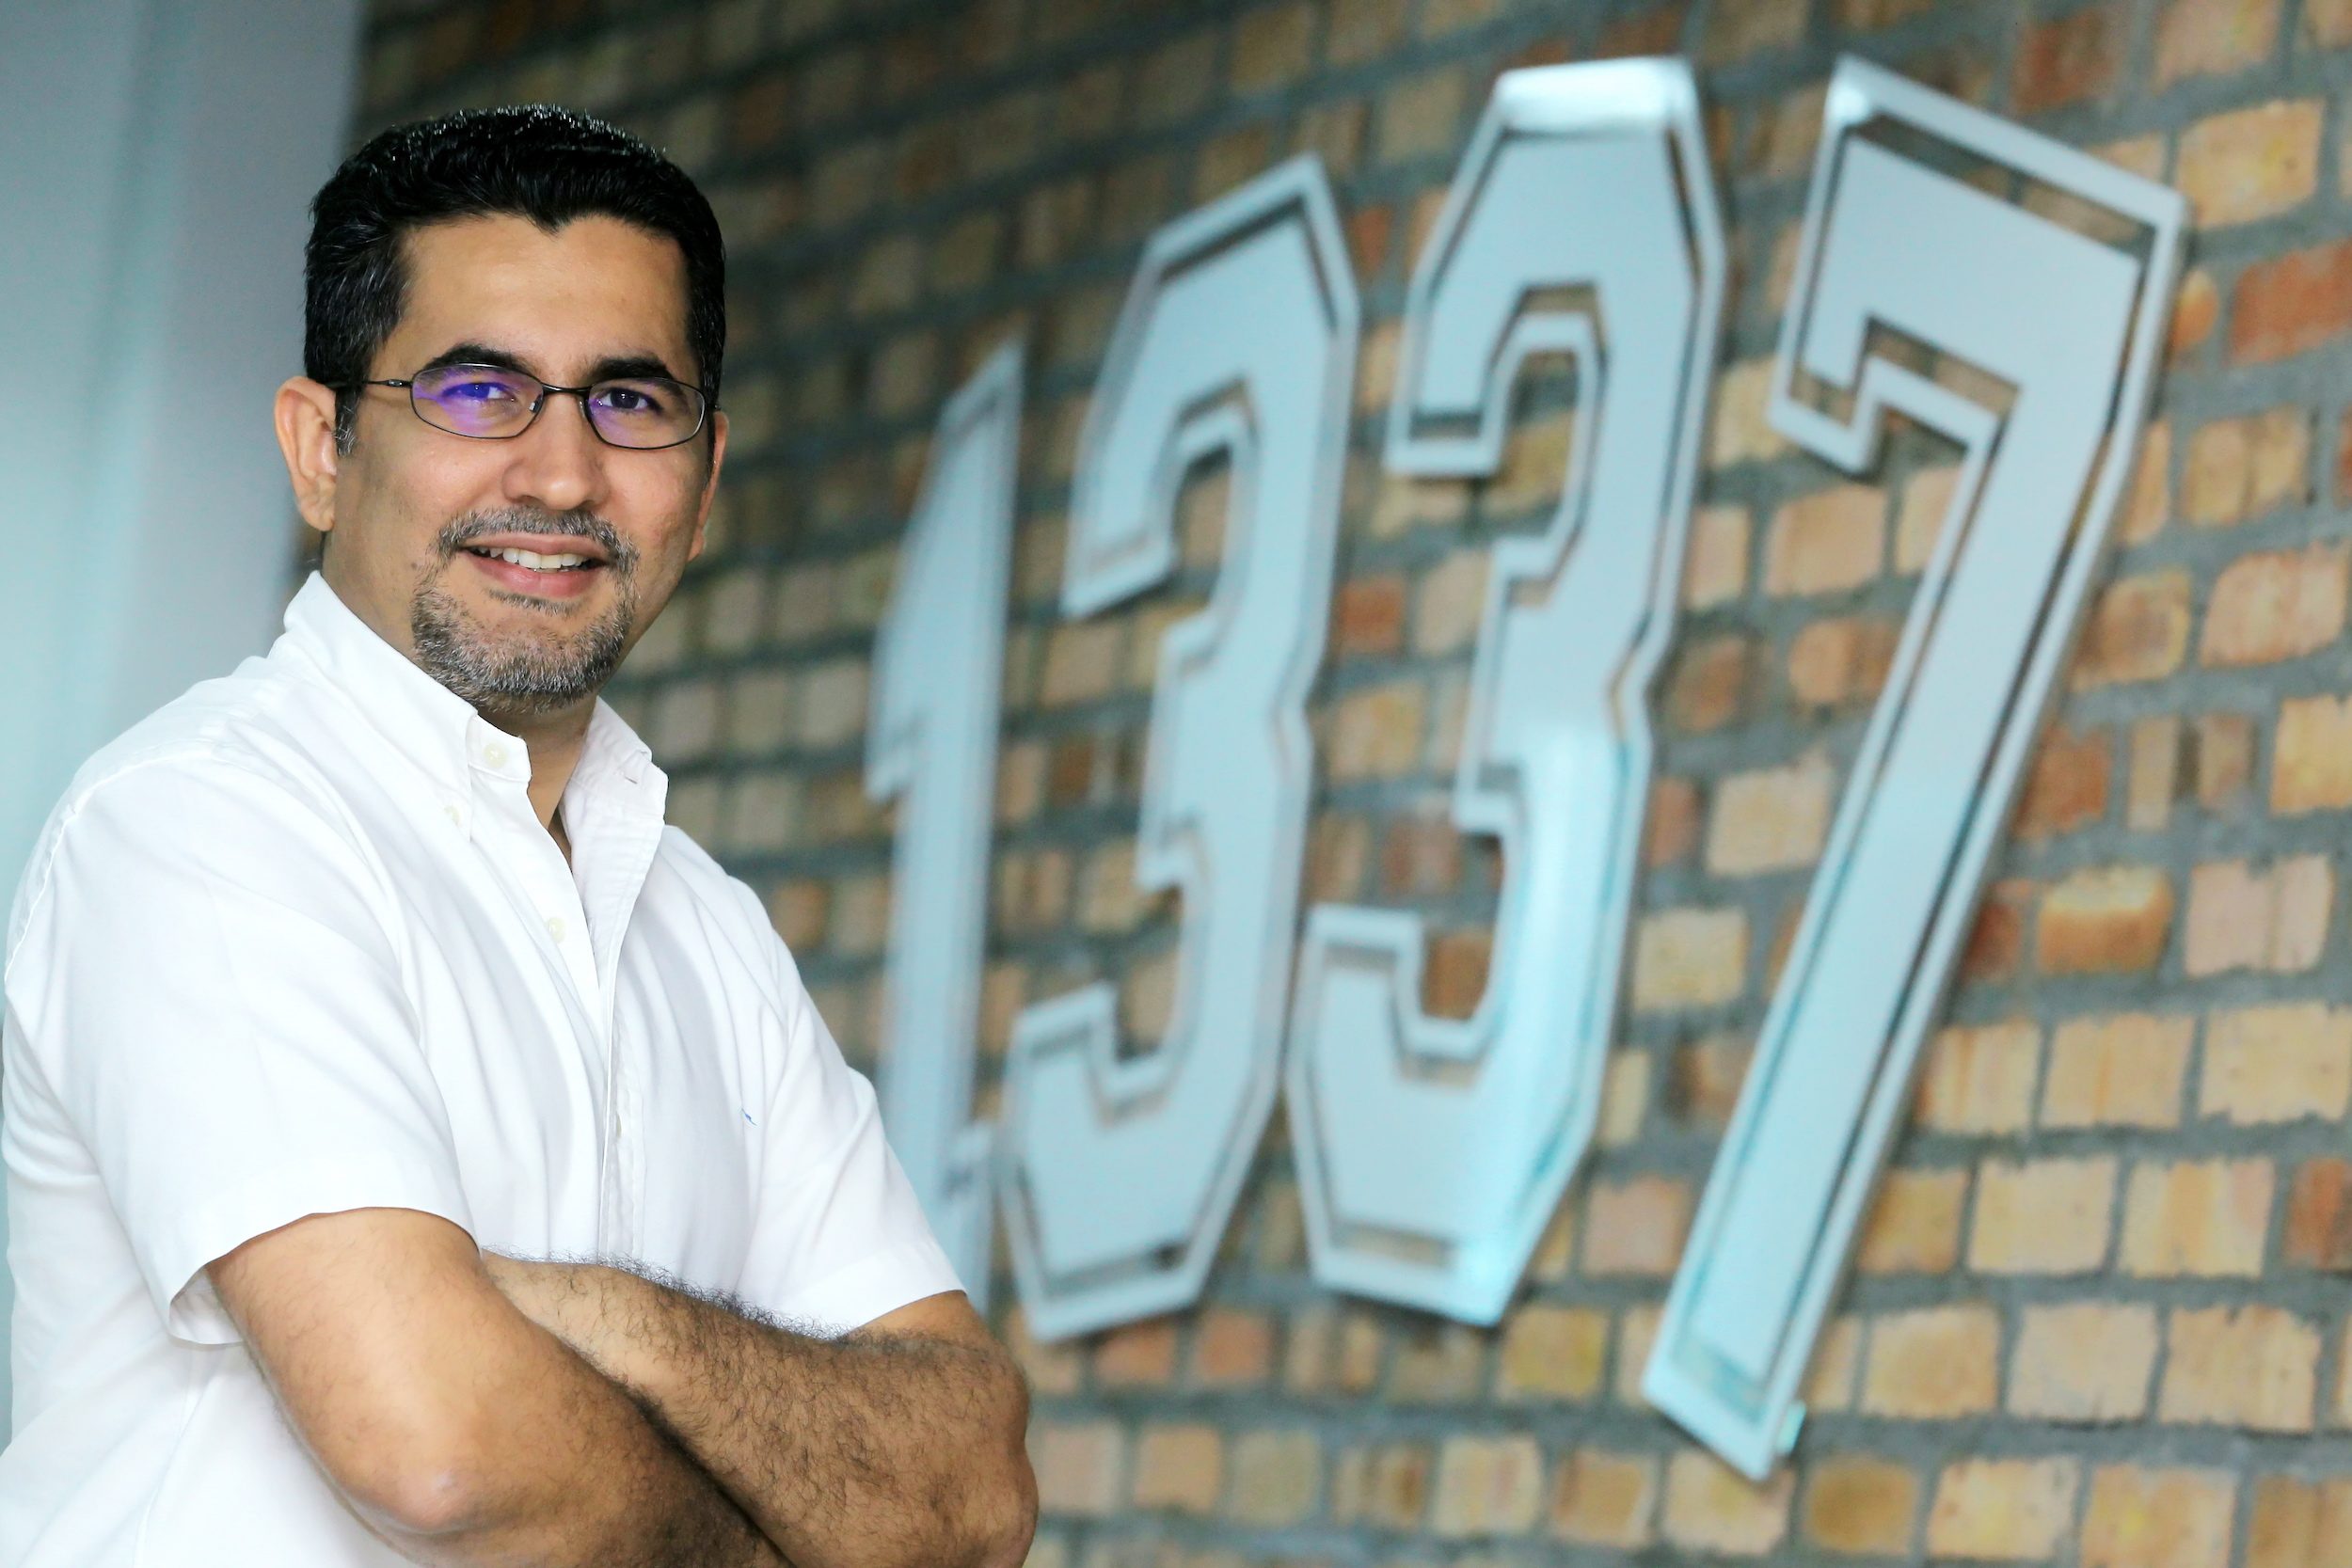 Malaysia's 1337 Ventures to launch equity crowdfunding platform by November